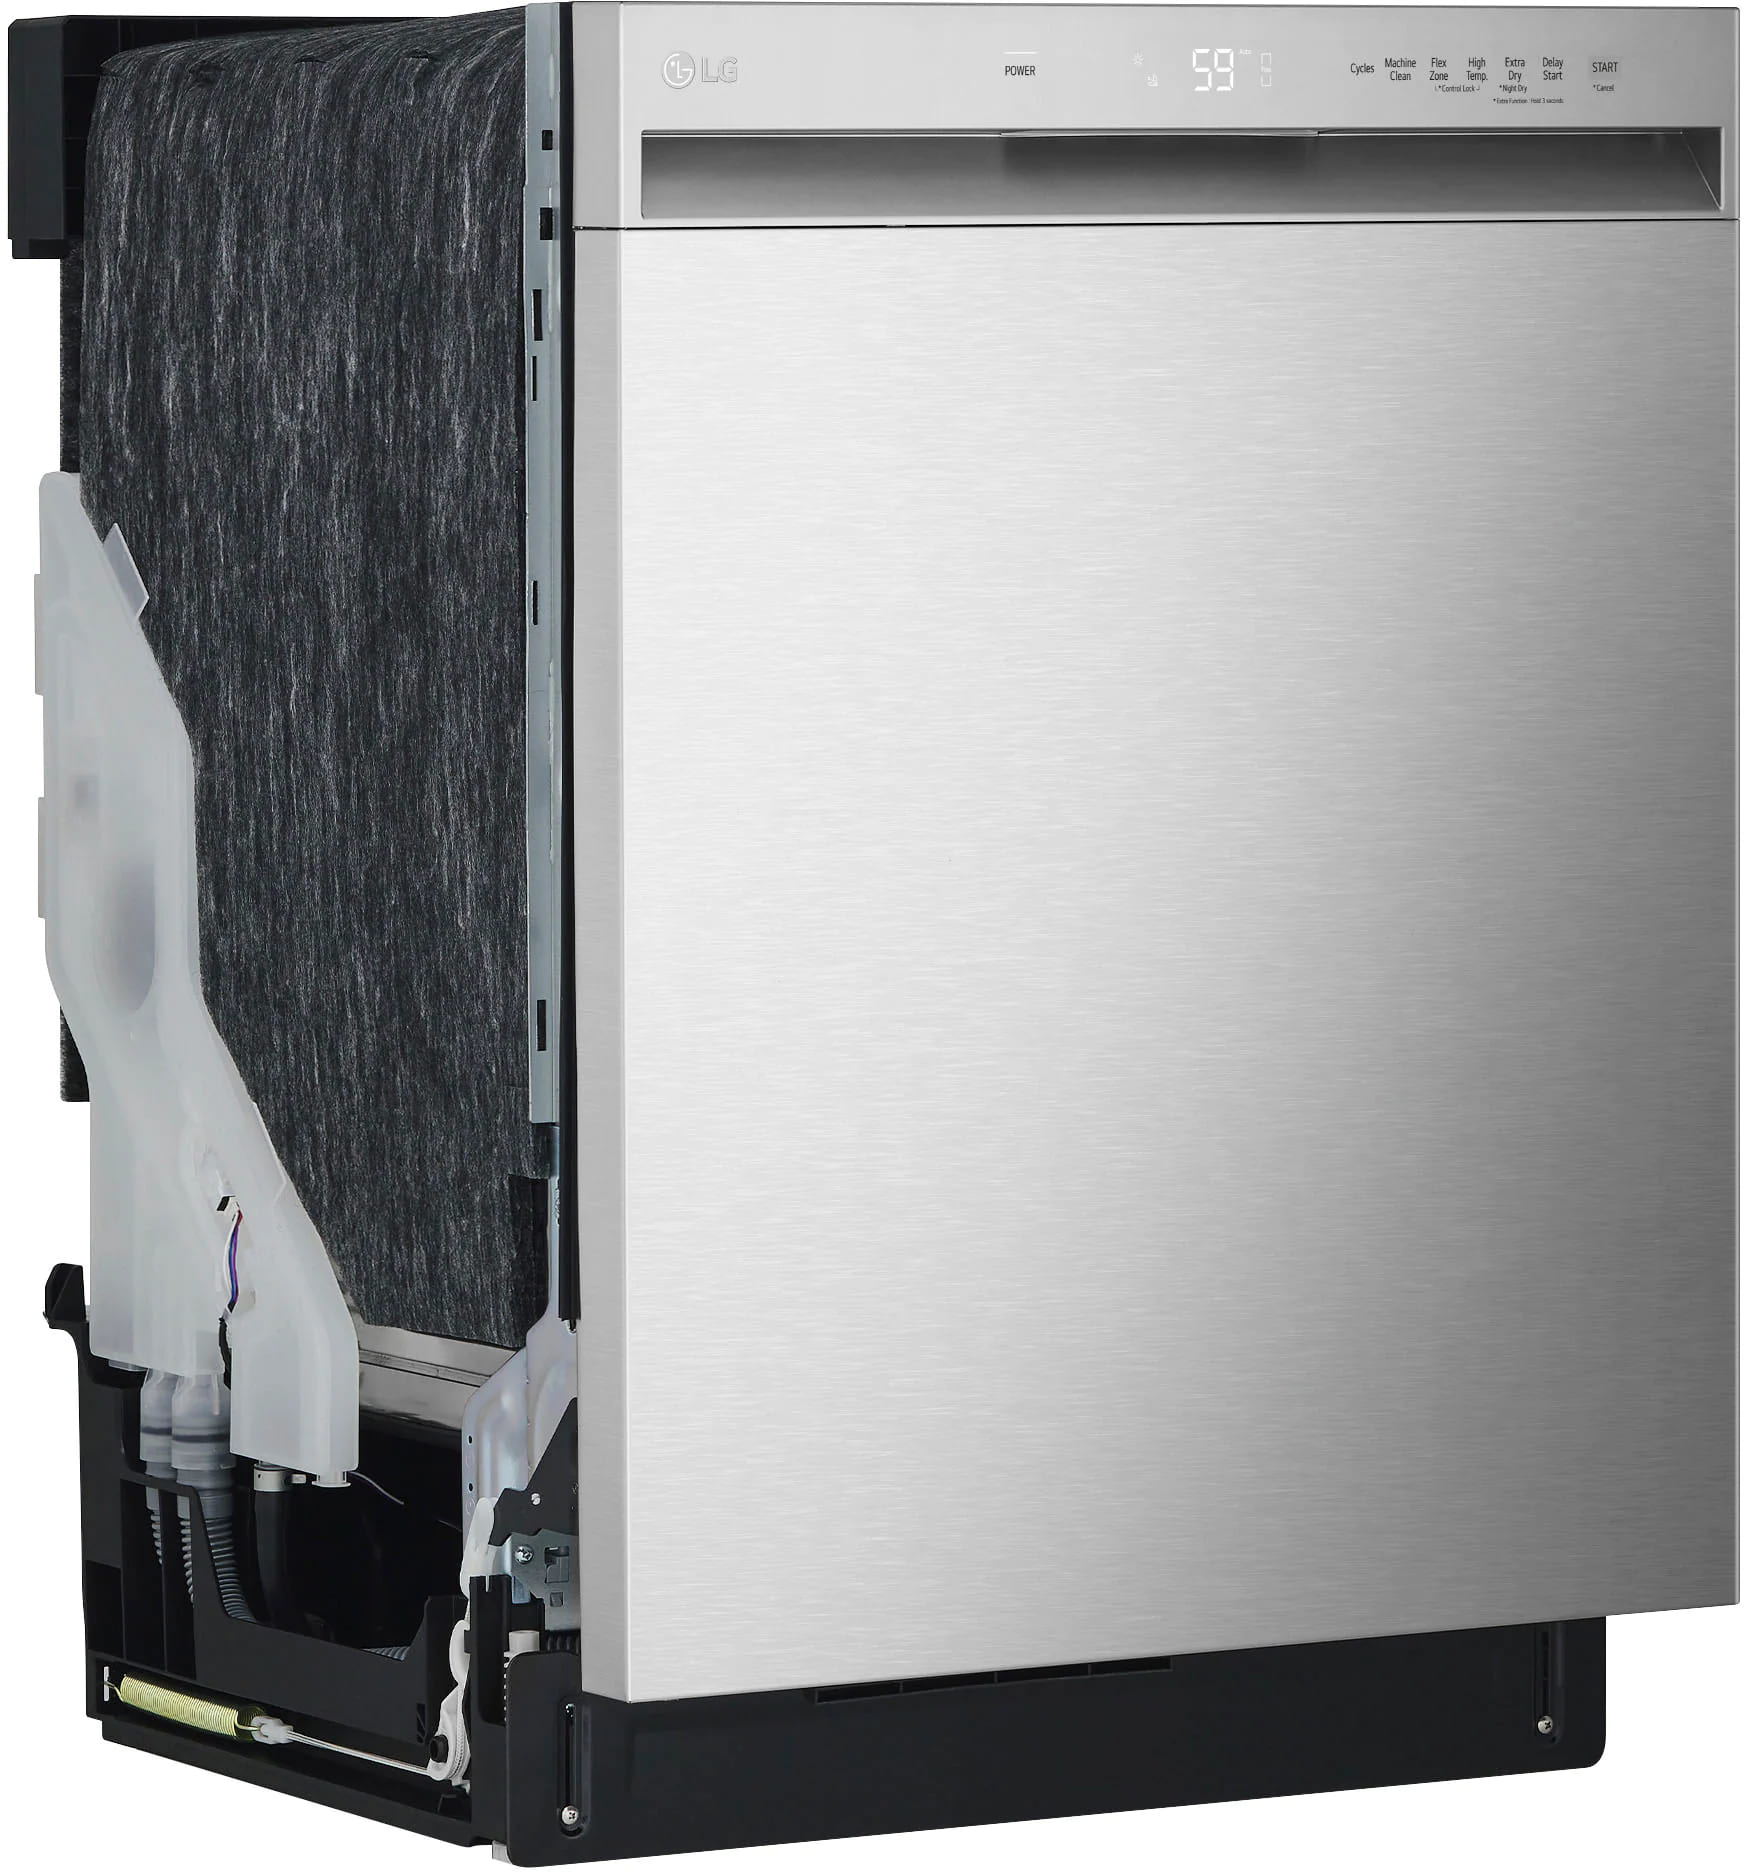 LG - Front-Control Built-In Dishwasher with Stainless Steel Tub